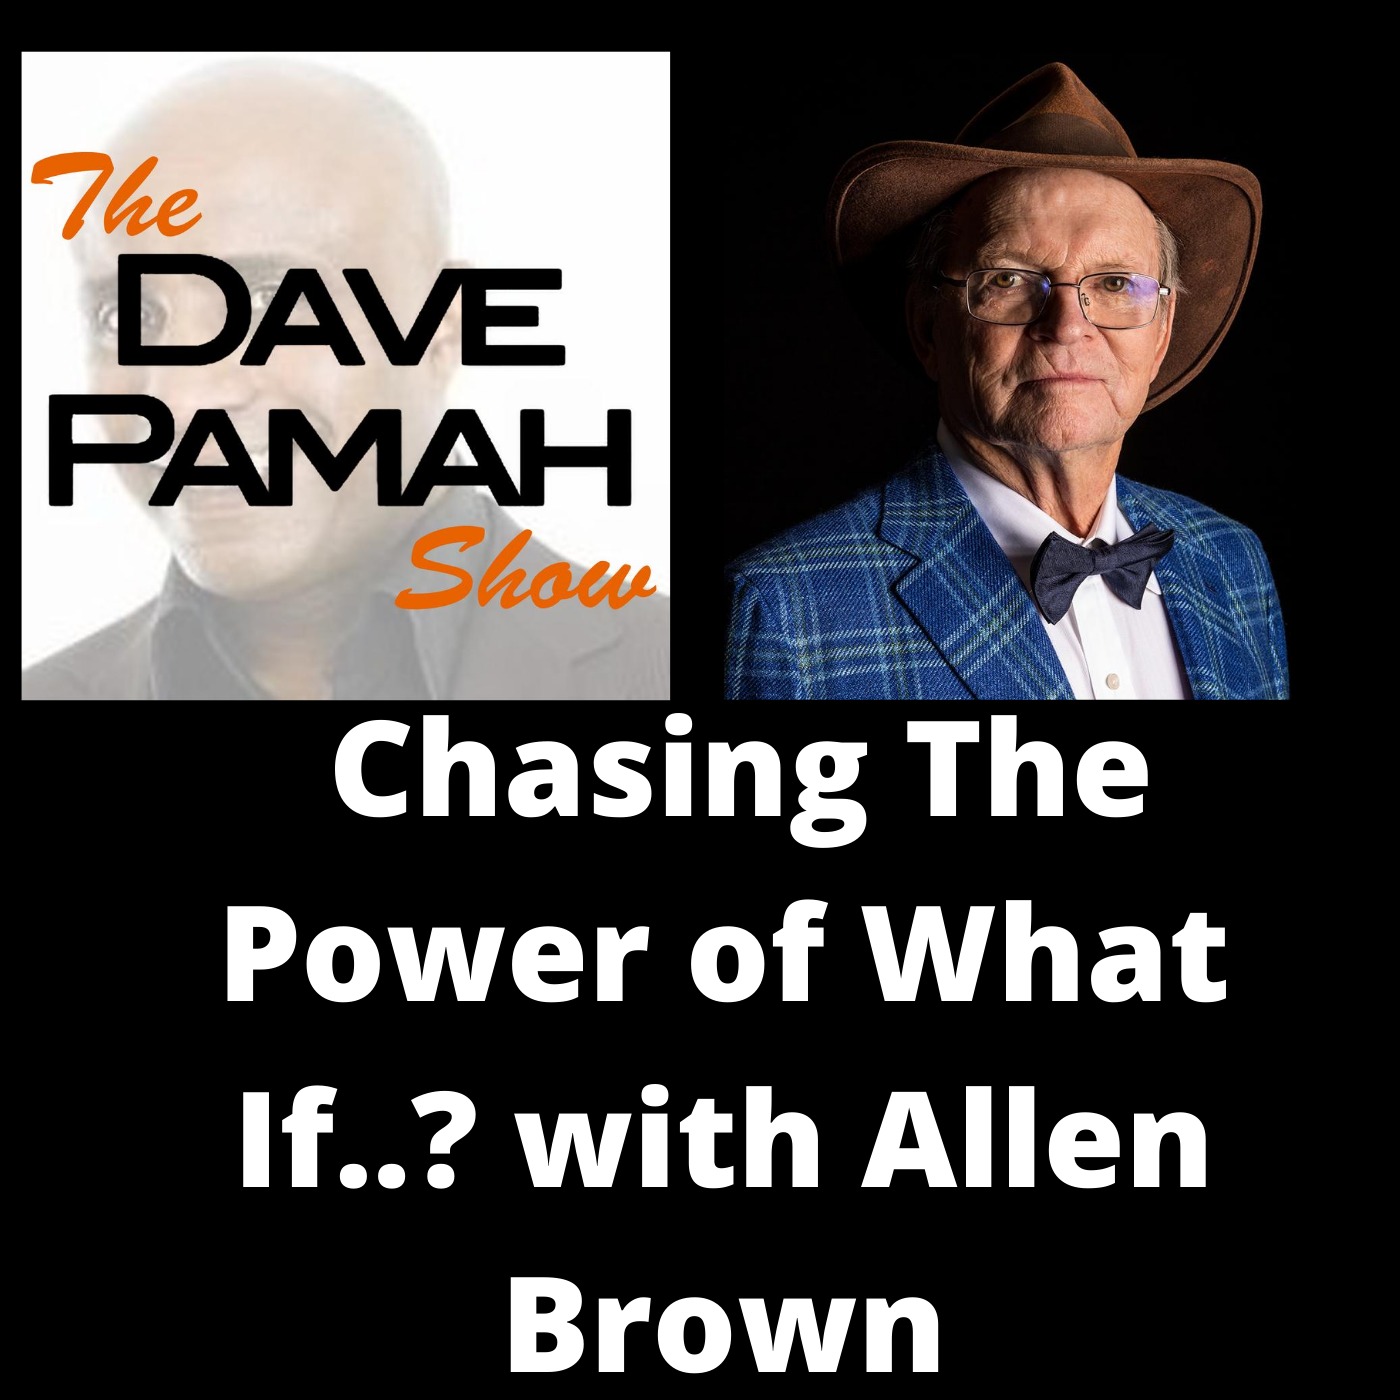 Chasing The Power of What If..? with Allen Brown